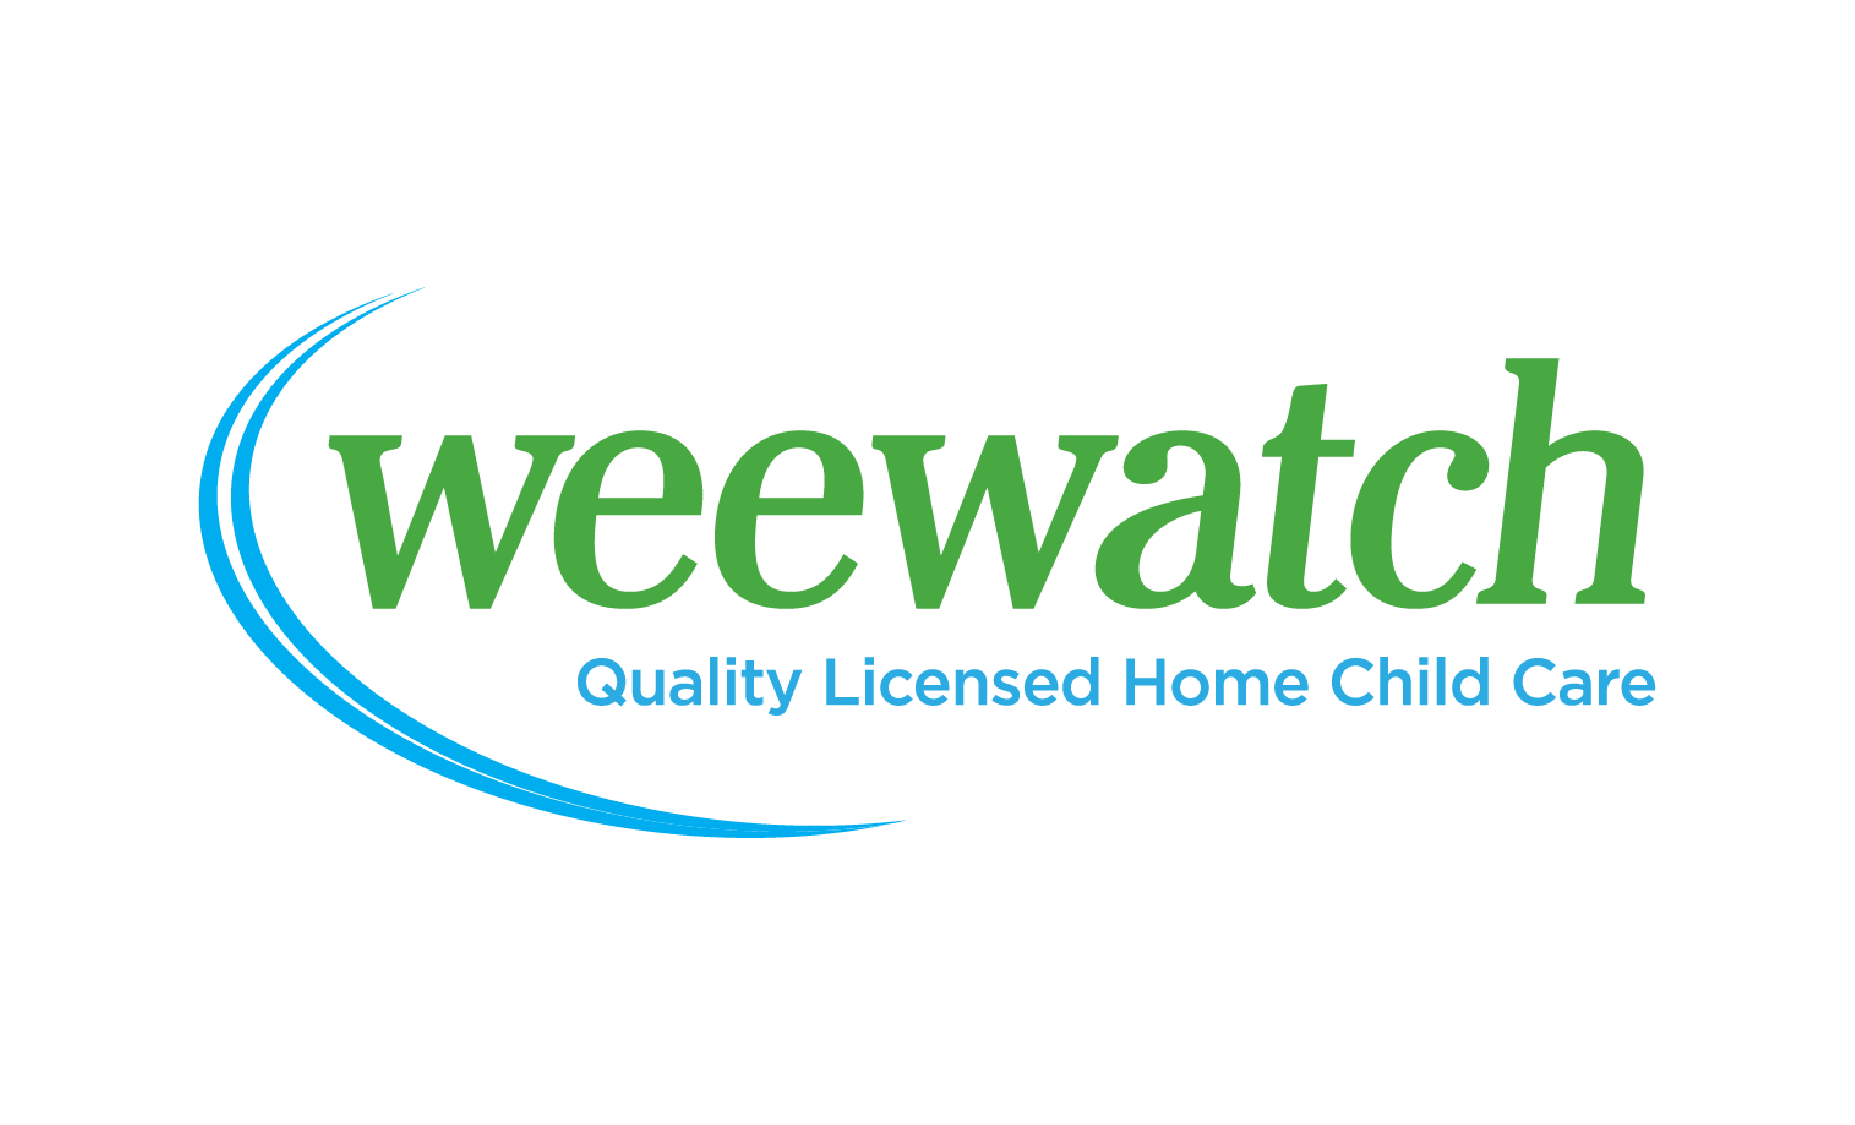 Weewatch logo with text "Weewatch Quality Licensed Home Child Care"